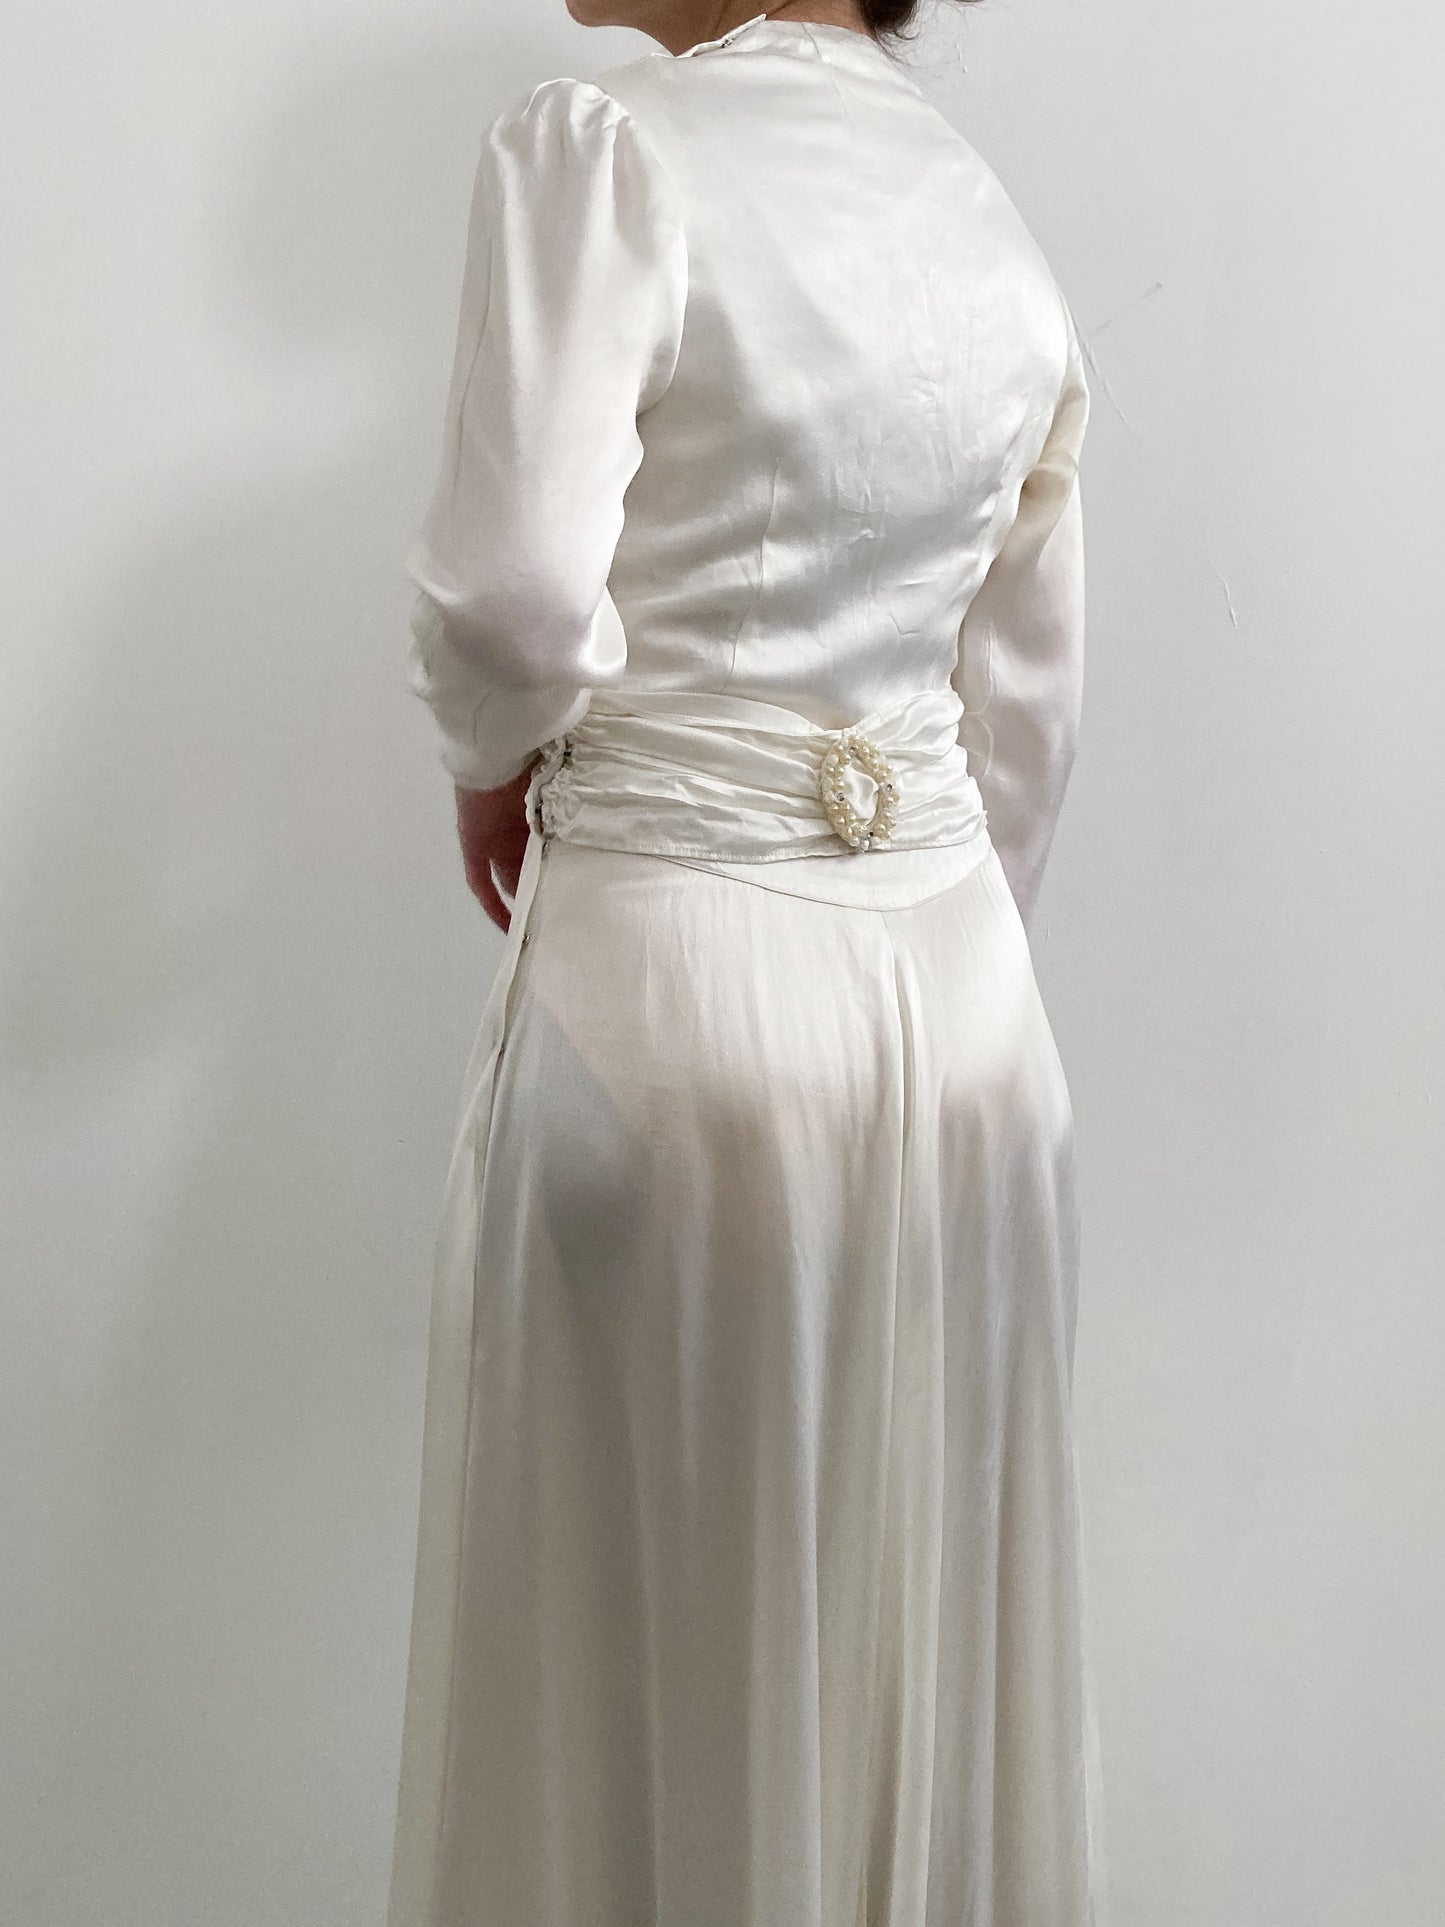 1940s Satin Wedding Dress with Pearl Details